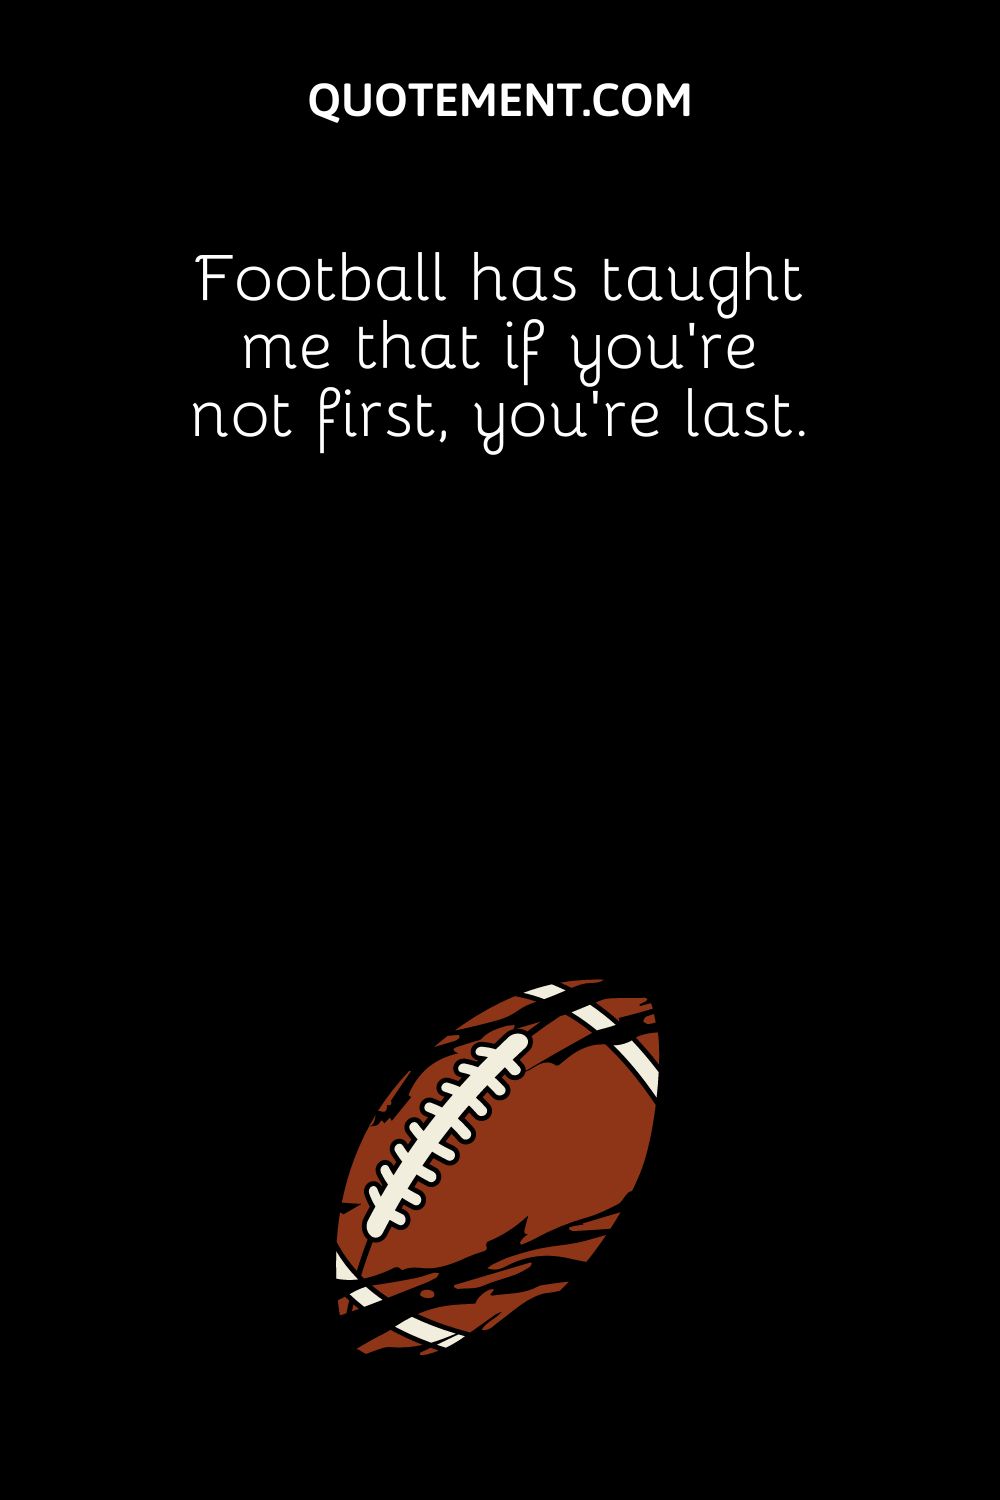 Football has taught me that if you're not first, you're last